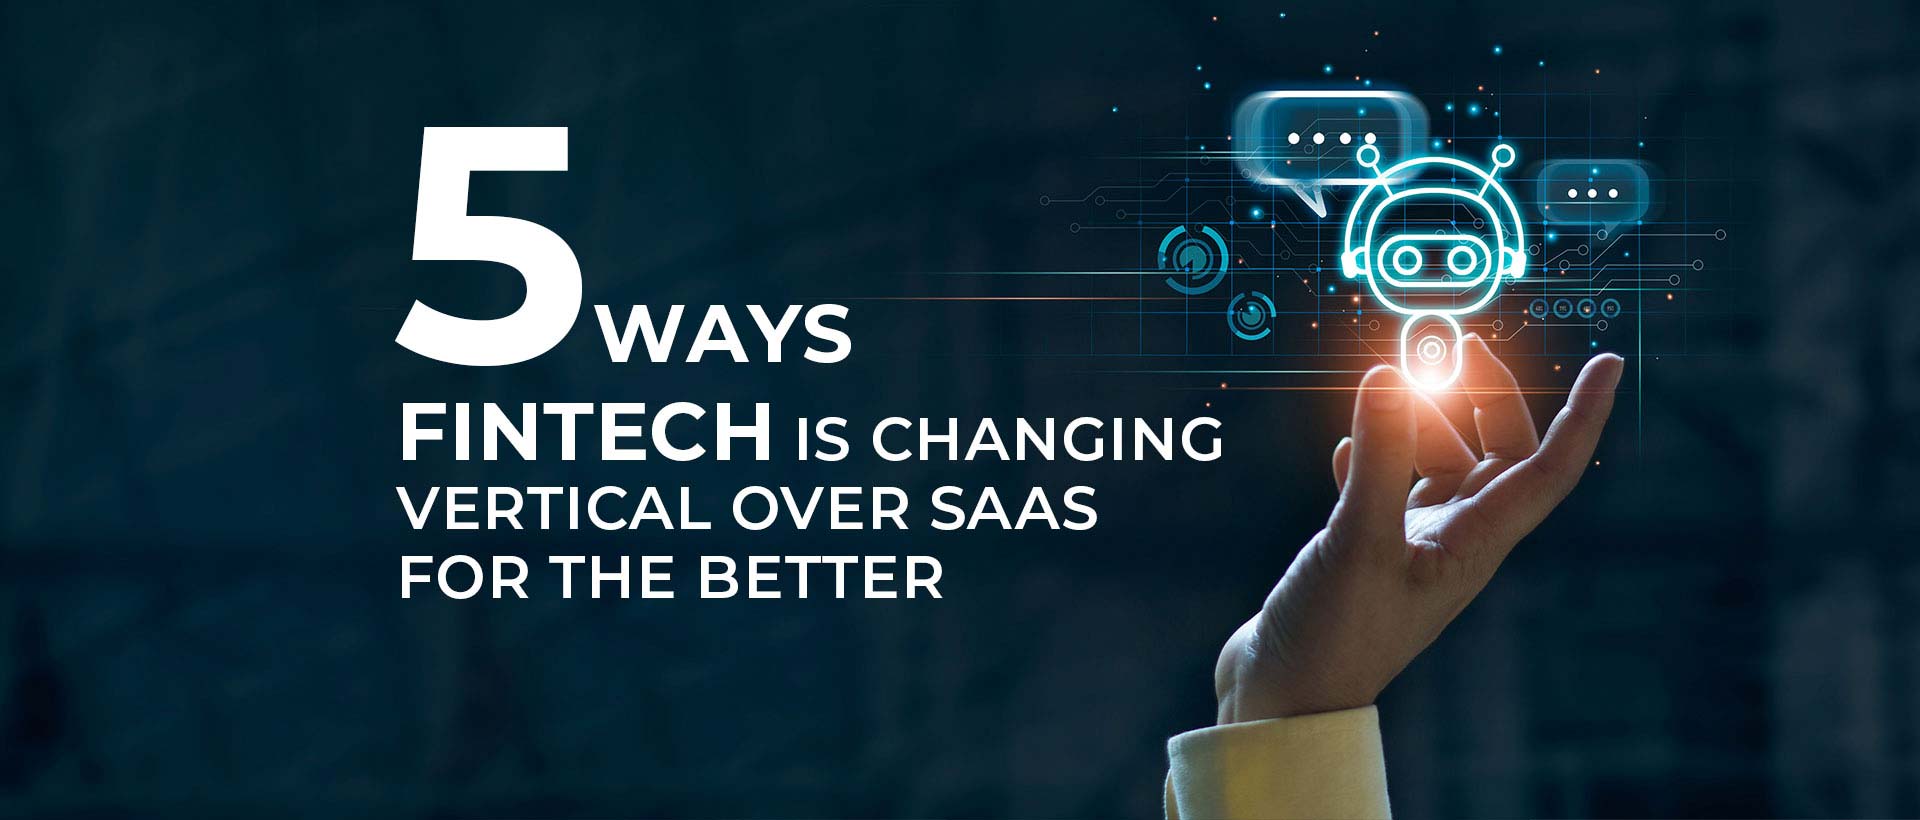 5 Ways Fintech Is Changing Vertical Over SaaS For The Better